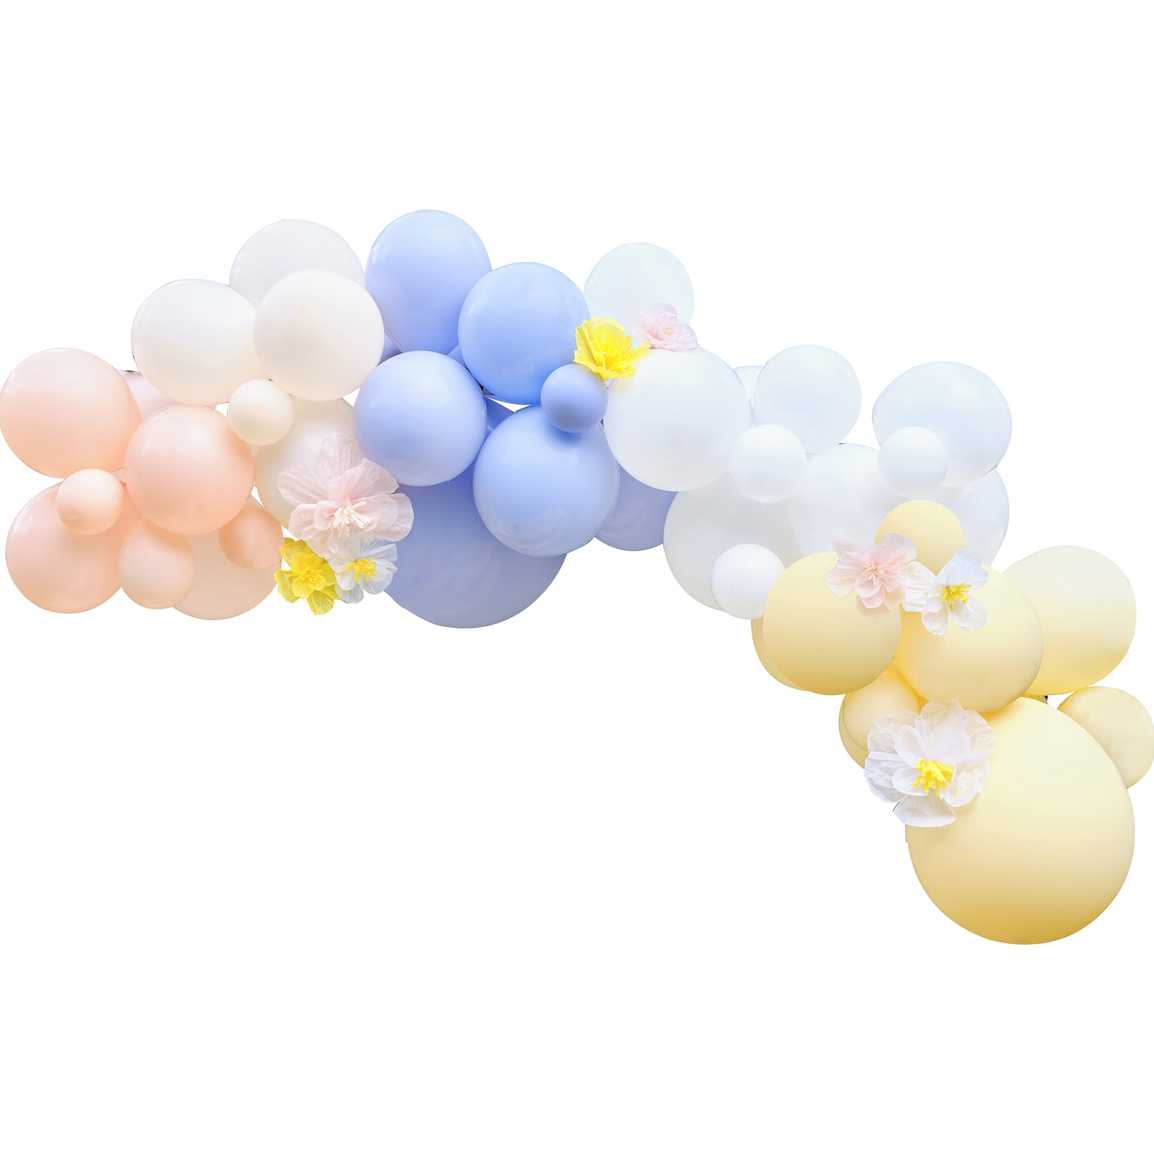 Ginger Ray Pastel Balloon Garland Kit with Tissue Paper Flowers (Pack of 60)